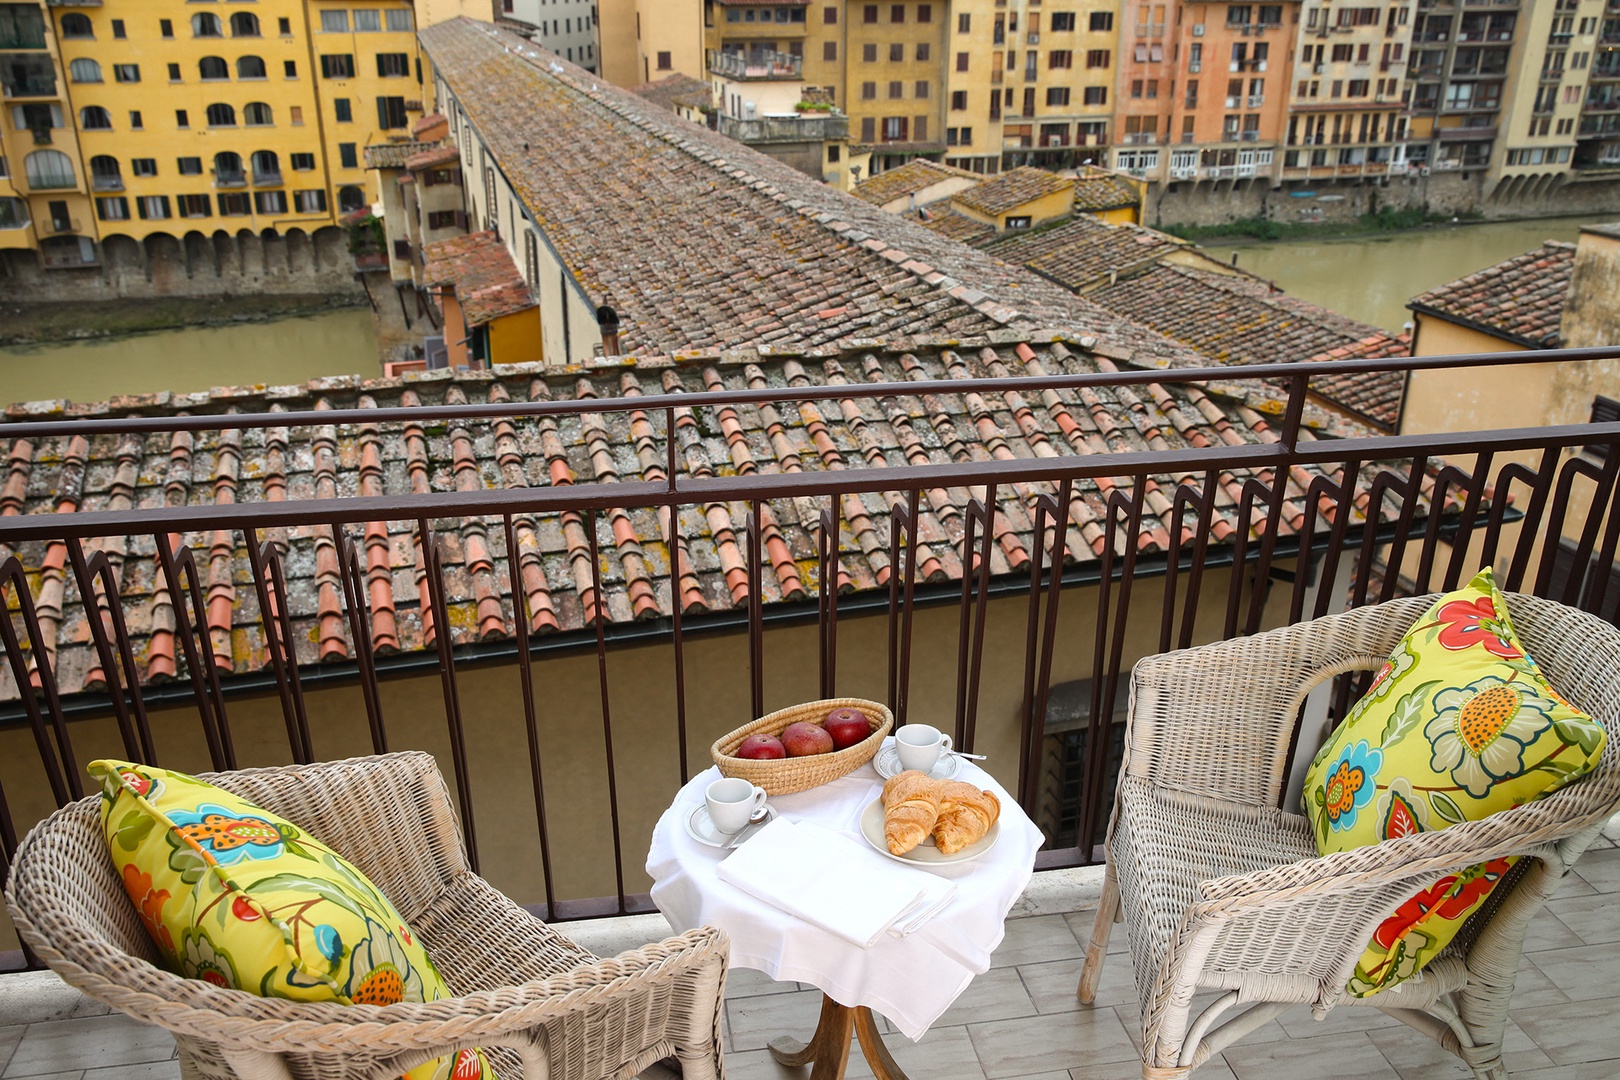 This will be your view standing on the terrace, the Ponte Vecchio is below.